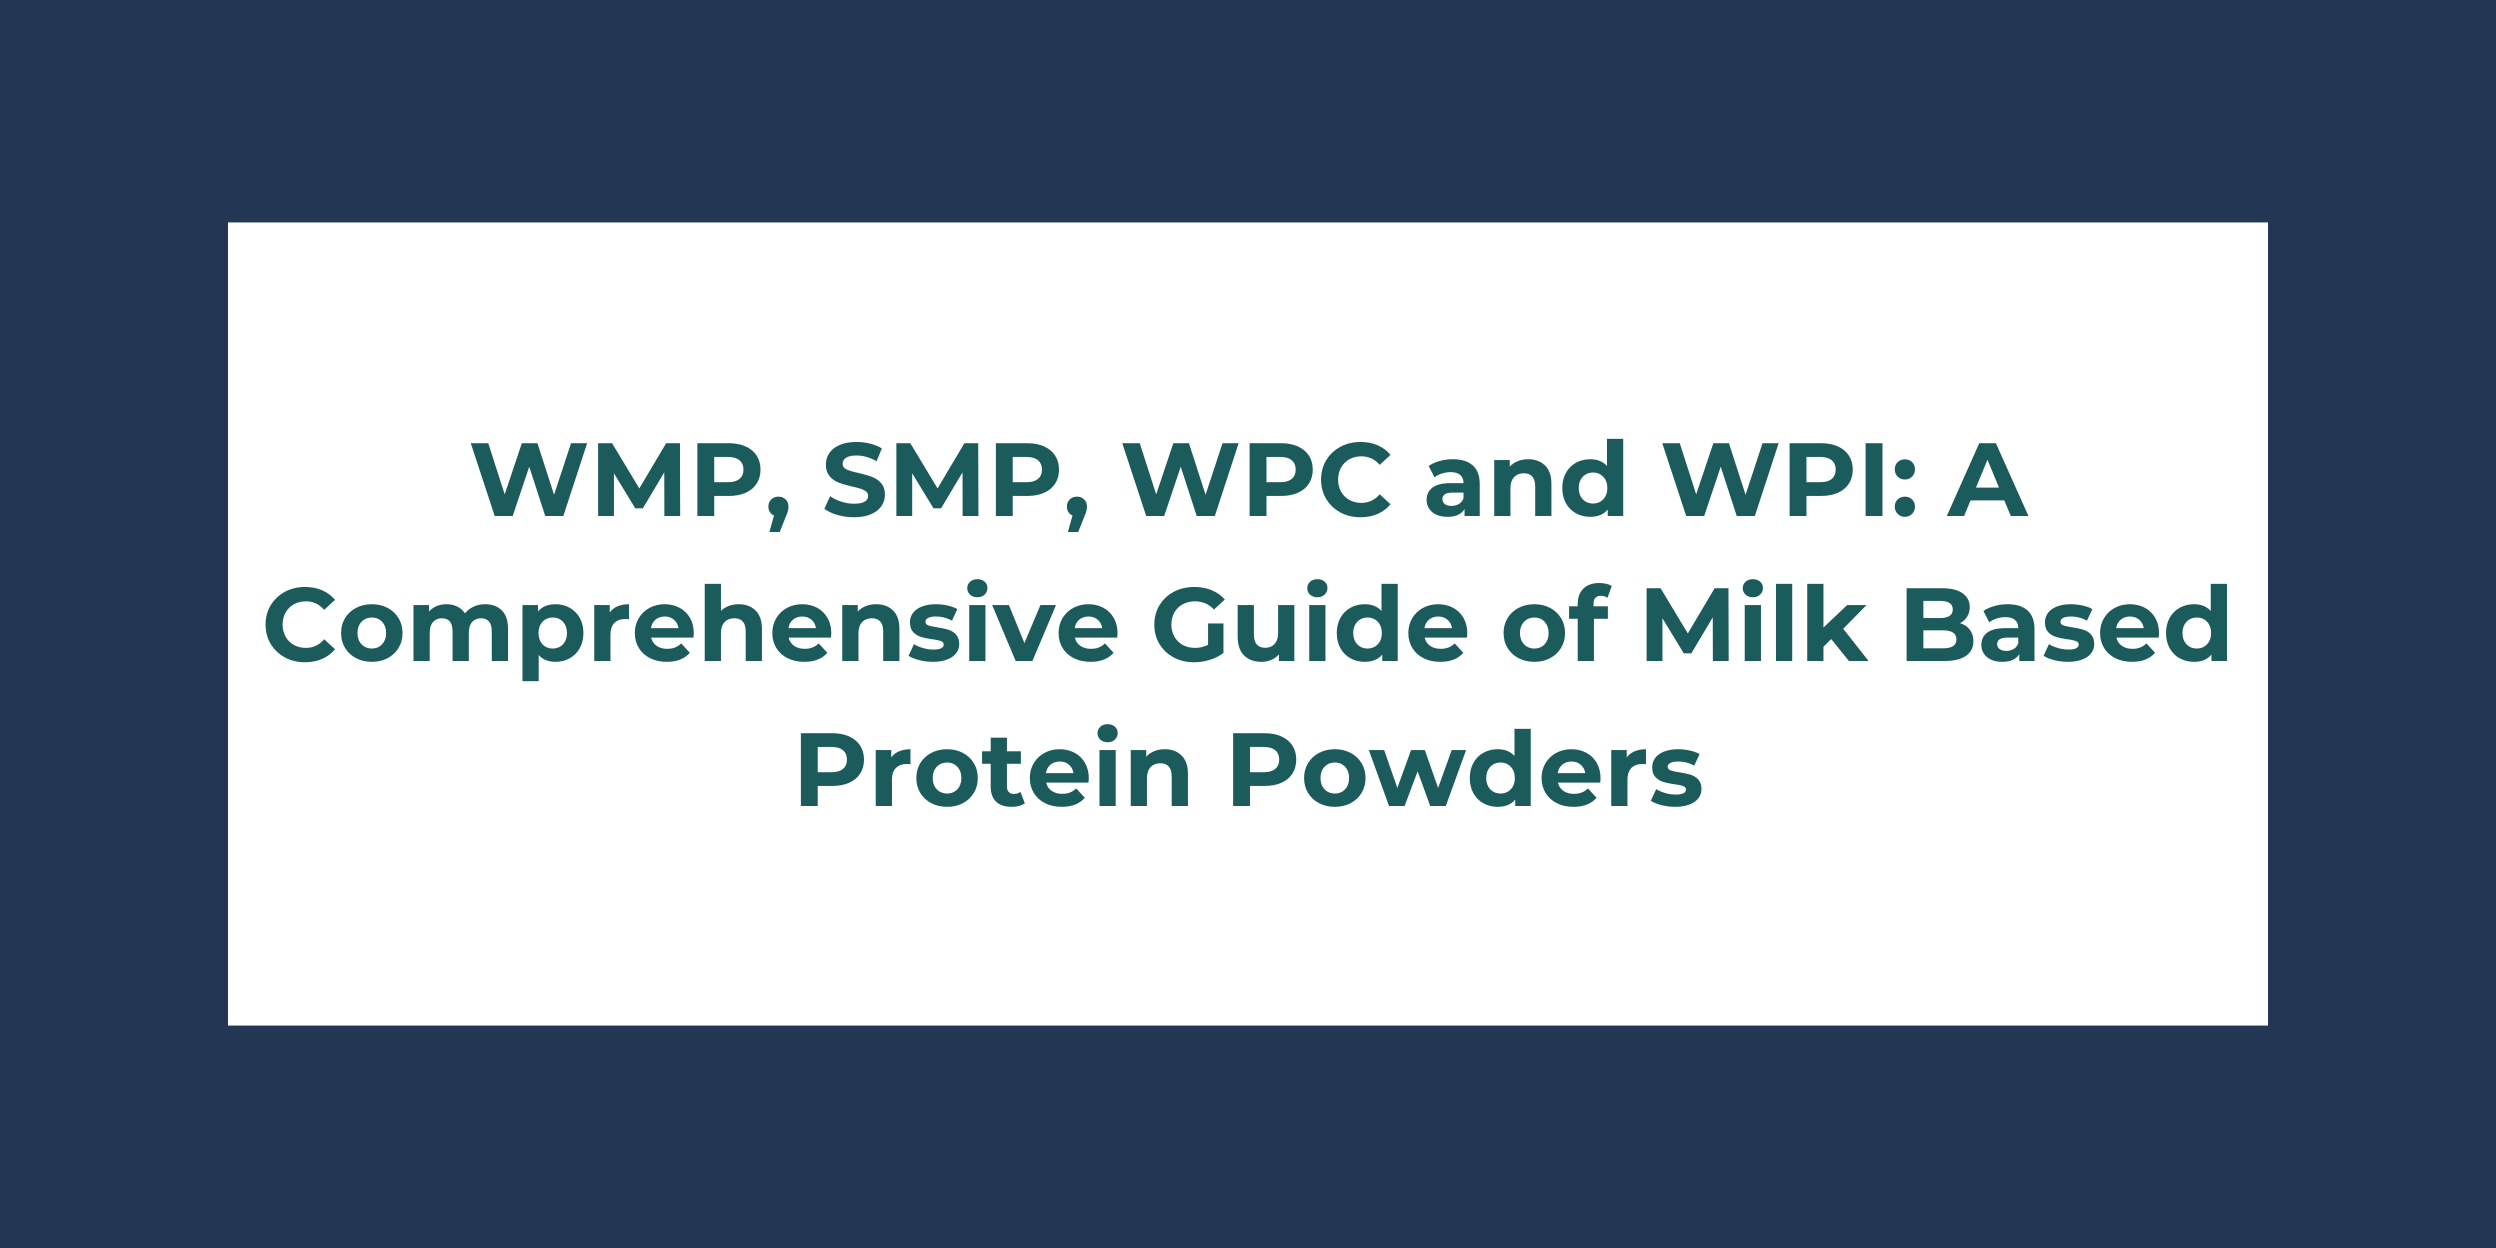 WMP, SMP, WPC and WPI A Comprehensive Guide of Milk Based Protein Powders